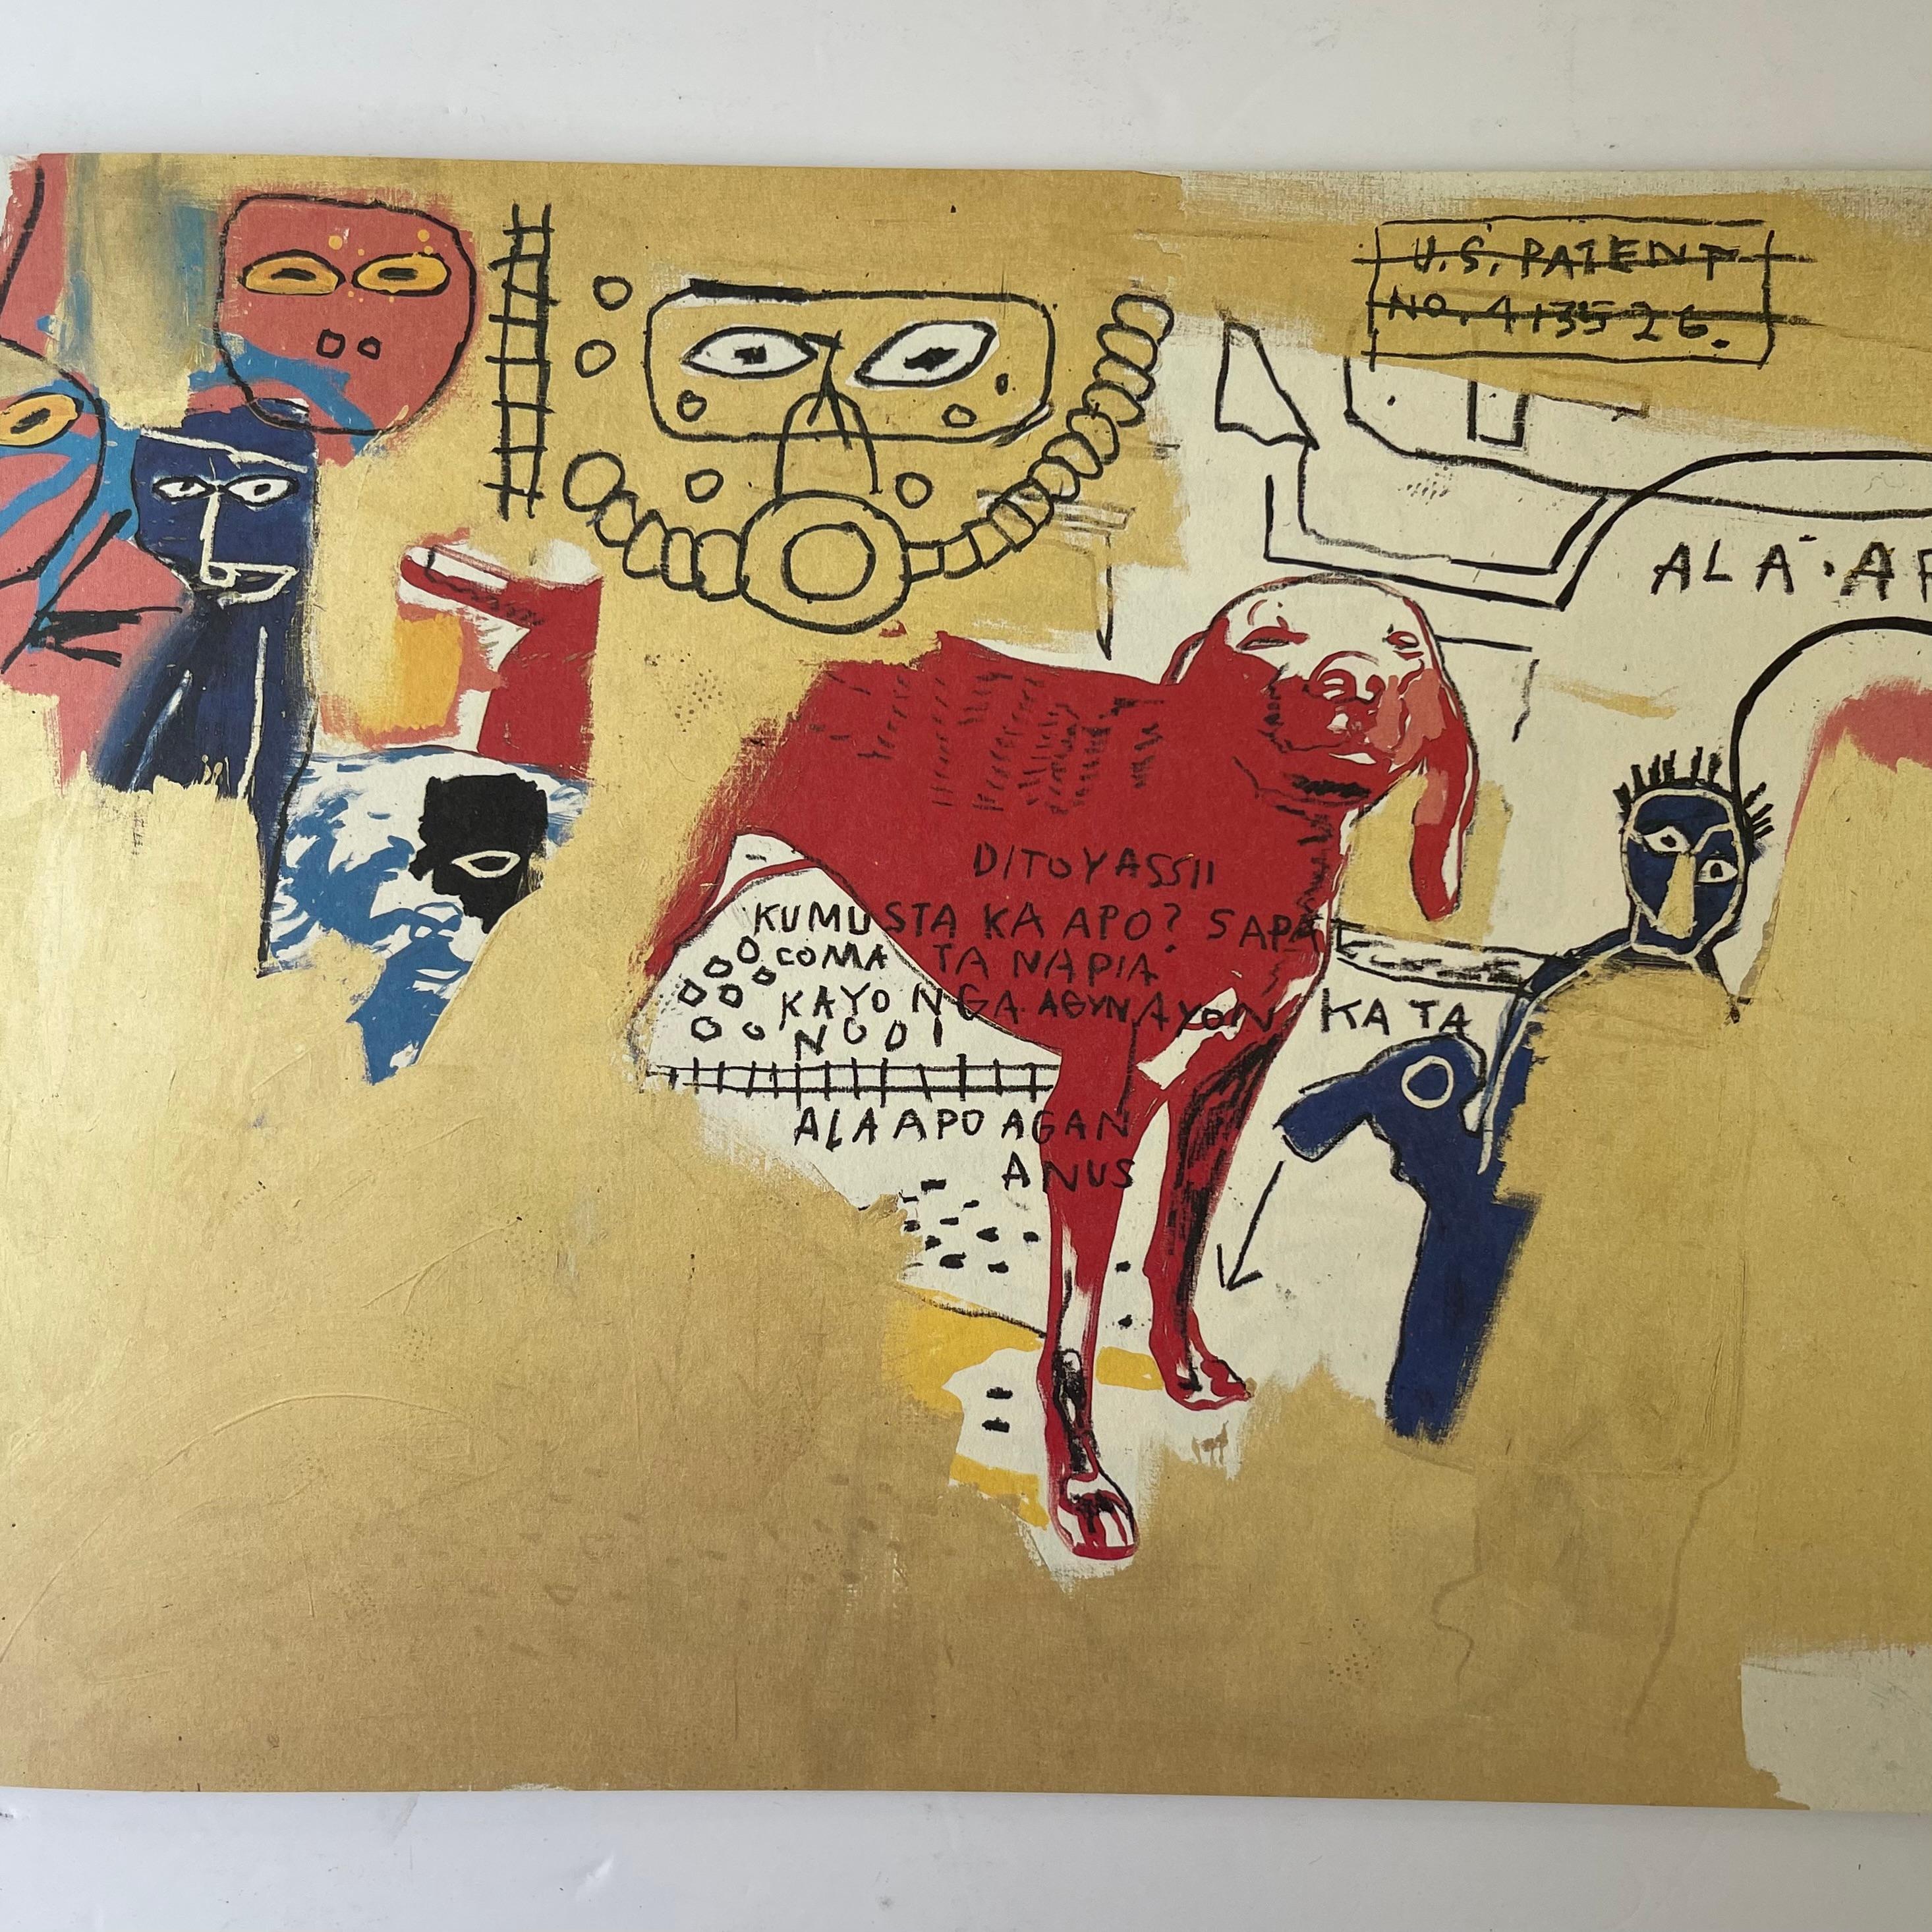 Paper Collaborations: Andy Warhol Jean-Michel Basquiat. 1988